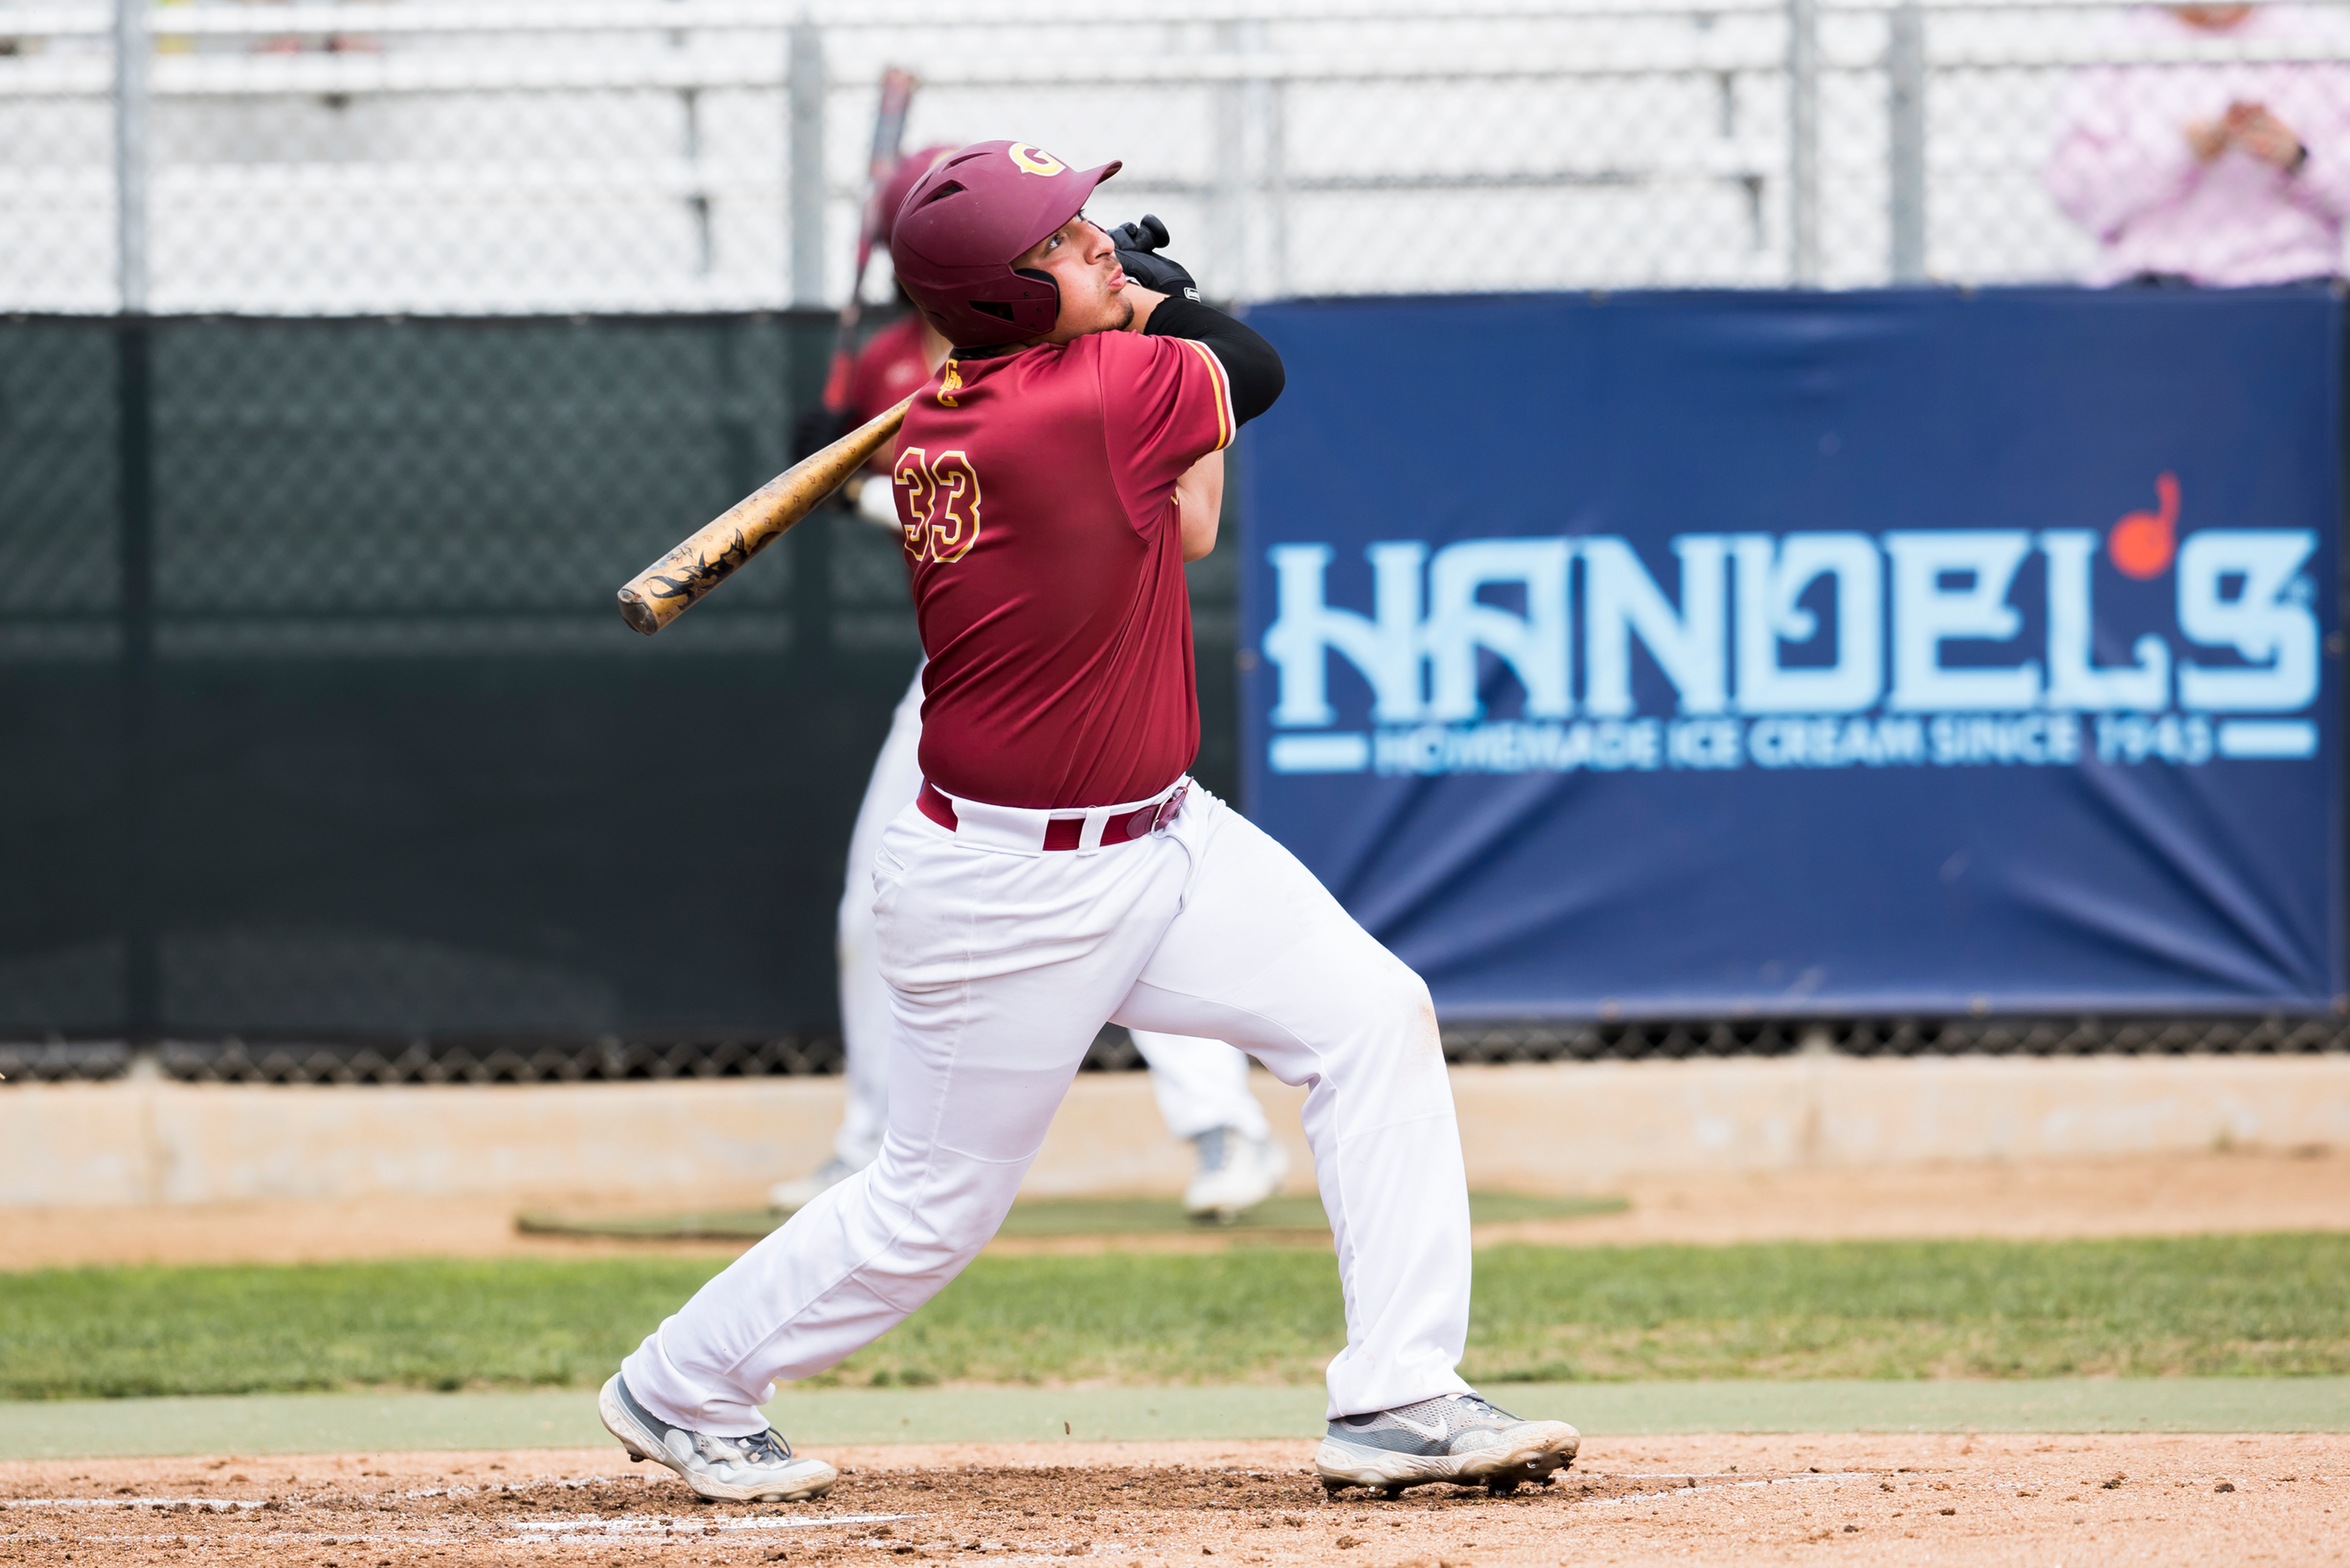 GCC Baseball opened defense of its 2022 WSC South Title with a pair of wins against Antelope Valley College, 14-4 Tuesday, March 7 and 20-6 Thursday, March 9. They are now 2-0 in conference play and 12-7 overall.